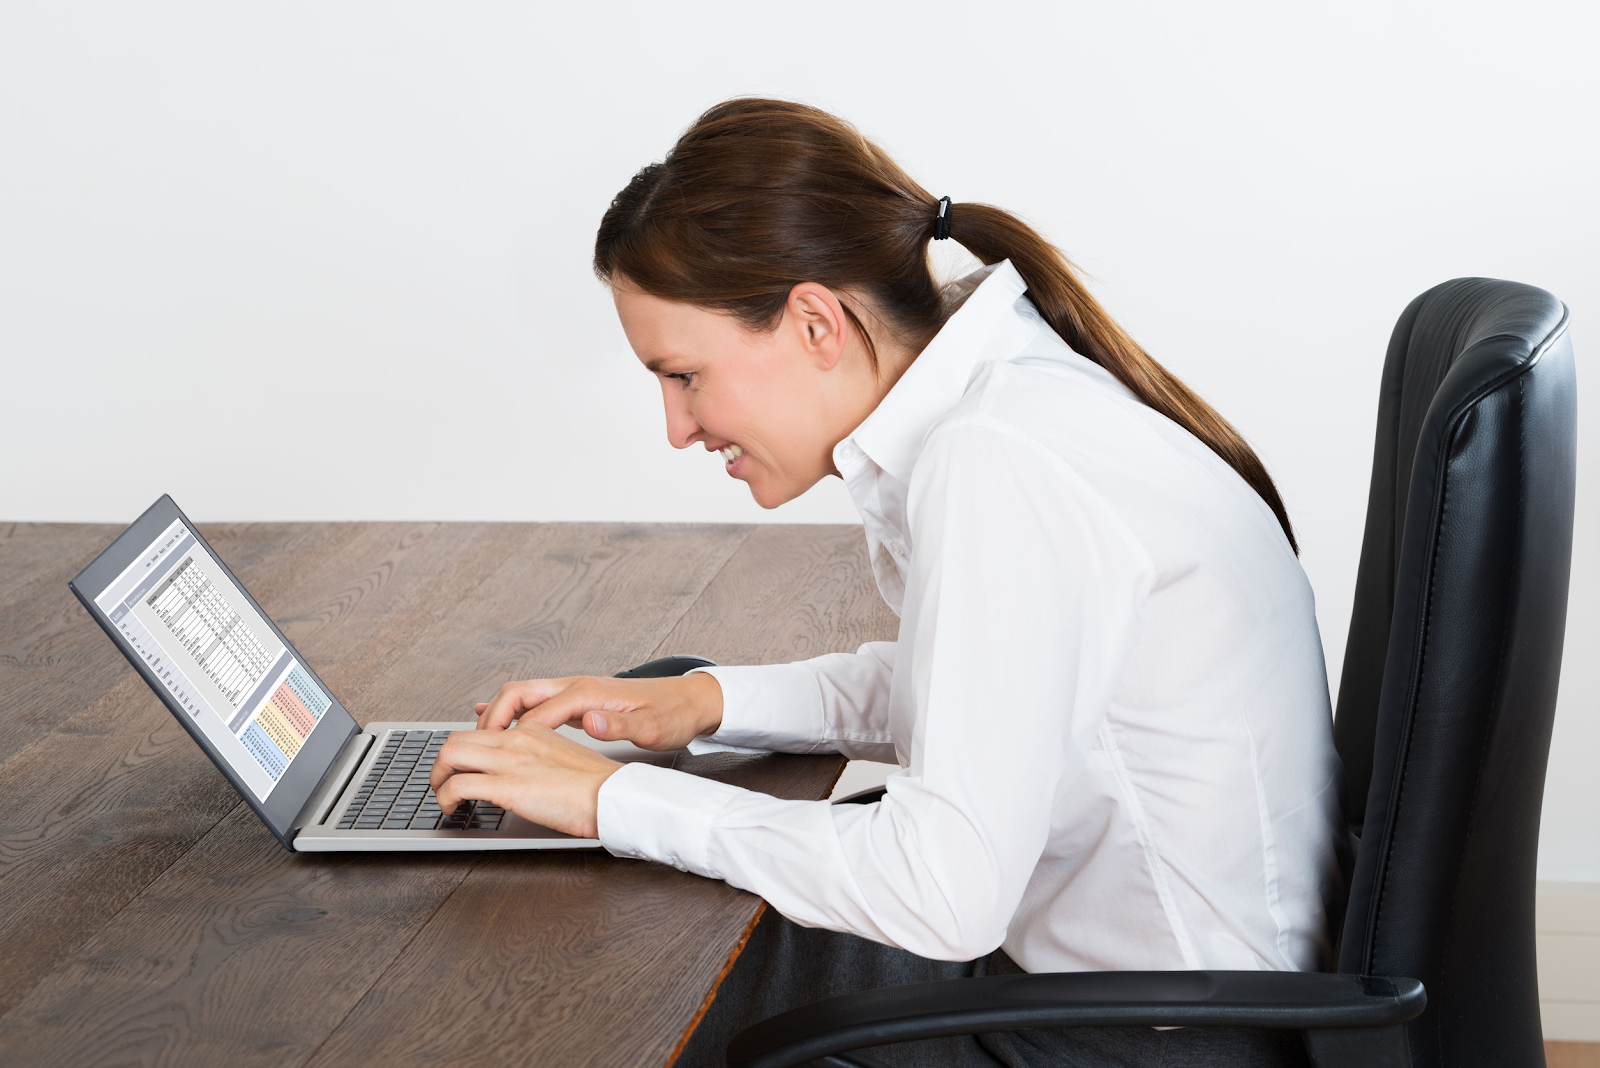 A woman hunched over the table working on her laptop